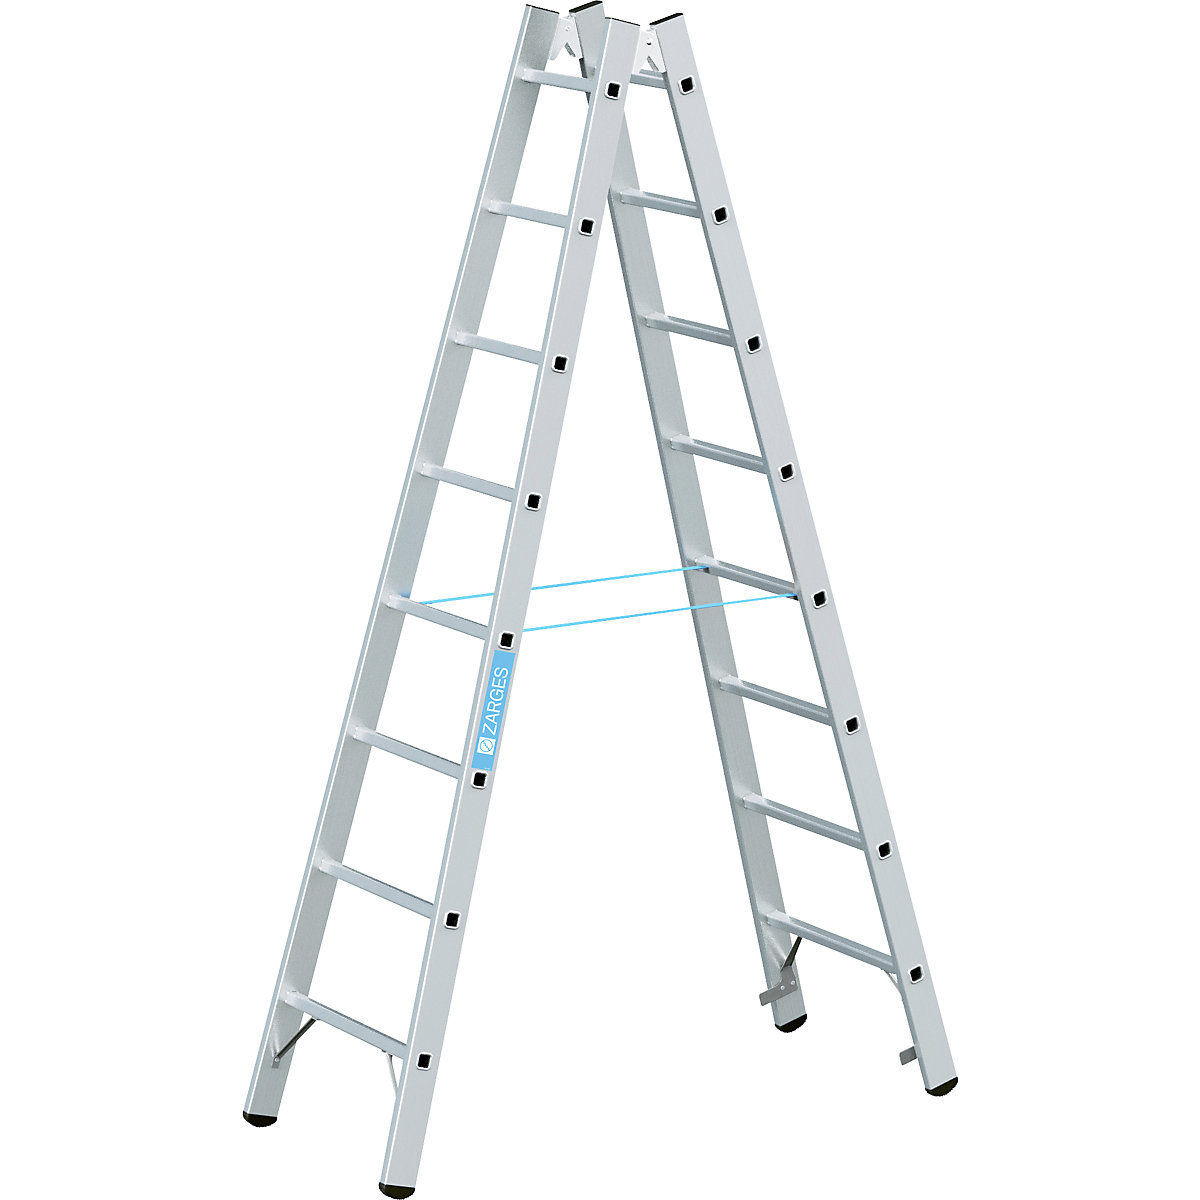 Professional rung ladder – ZARGES, double sided, 2 x 8 rungs-4